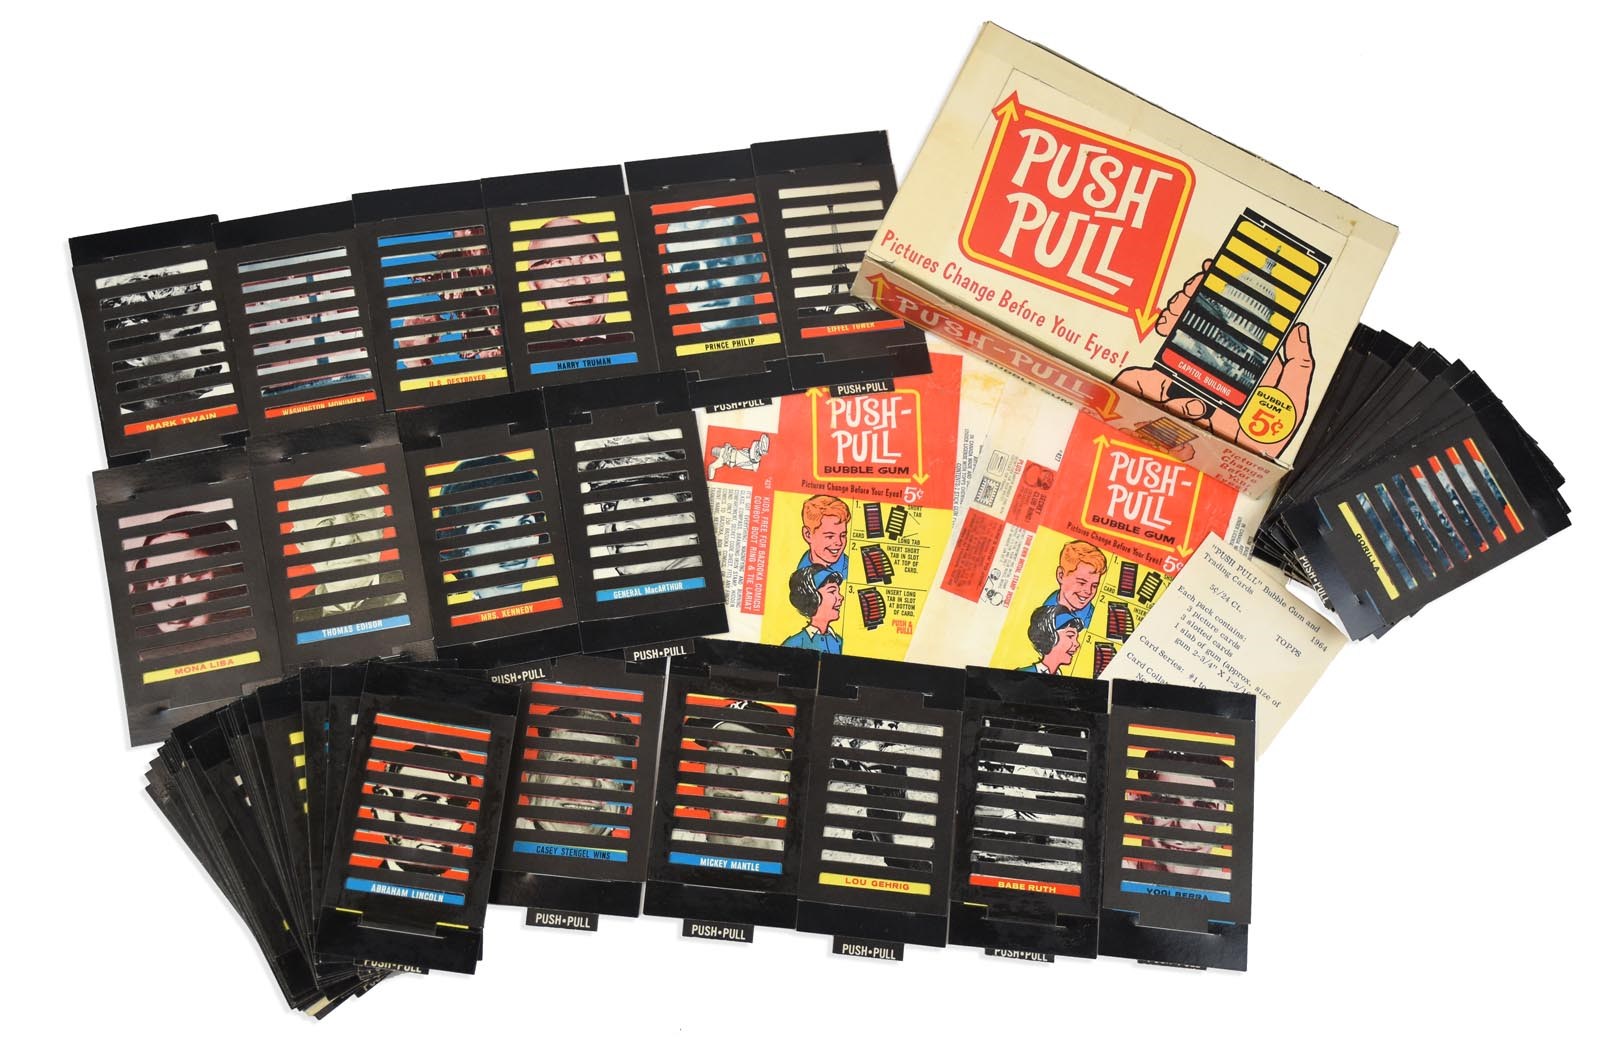 Baseball and Trading Cards - 1965 Topps Push-Pull Sets, Wrappers & Box From The Fleer Archive